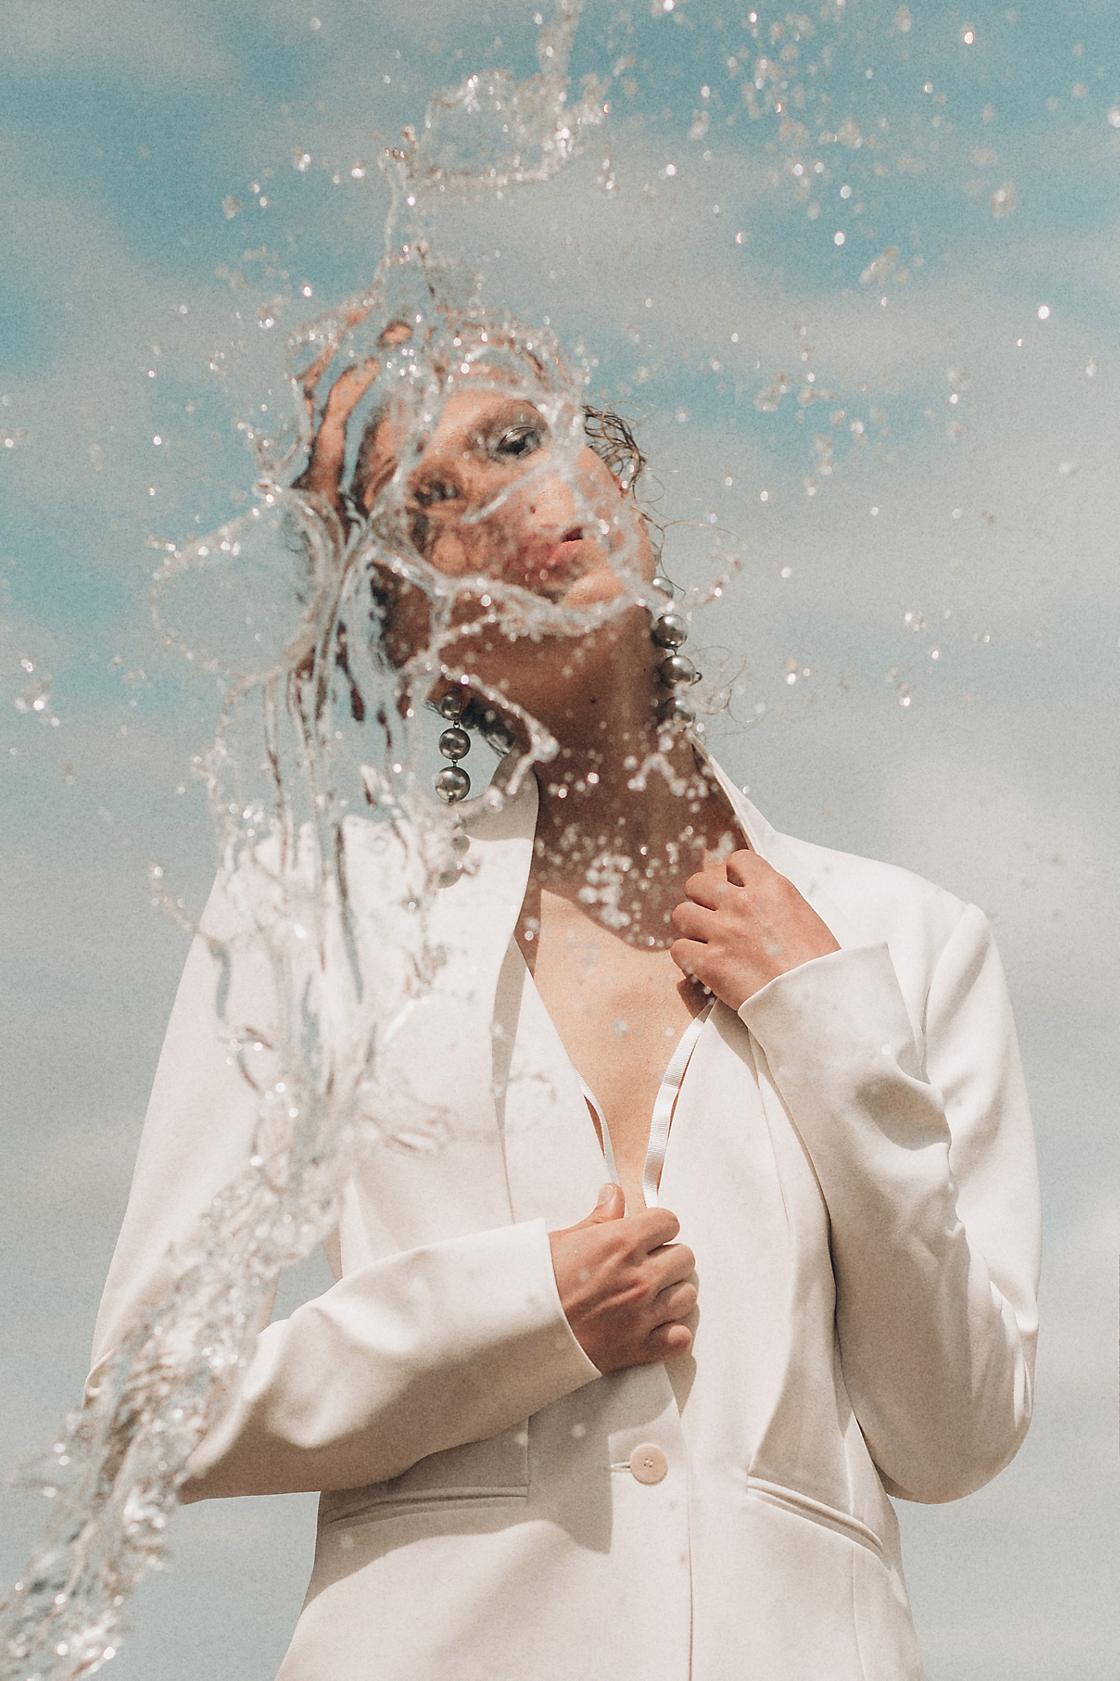 Editorial fashion photo of model being splashed with water